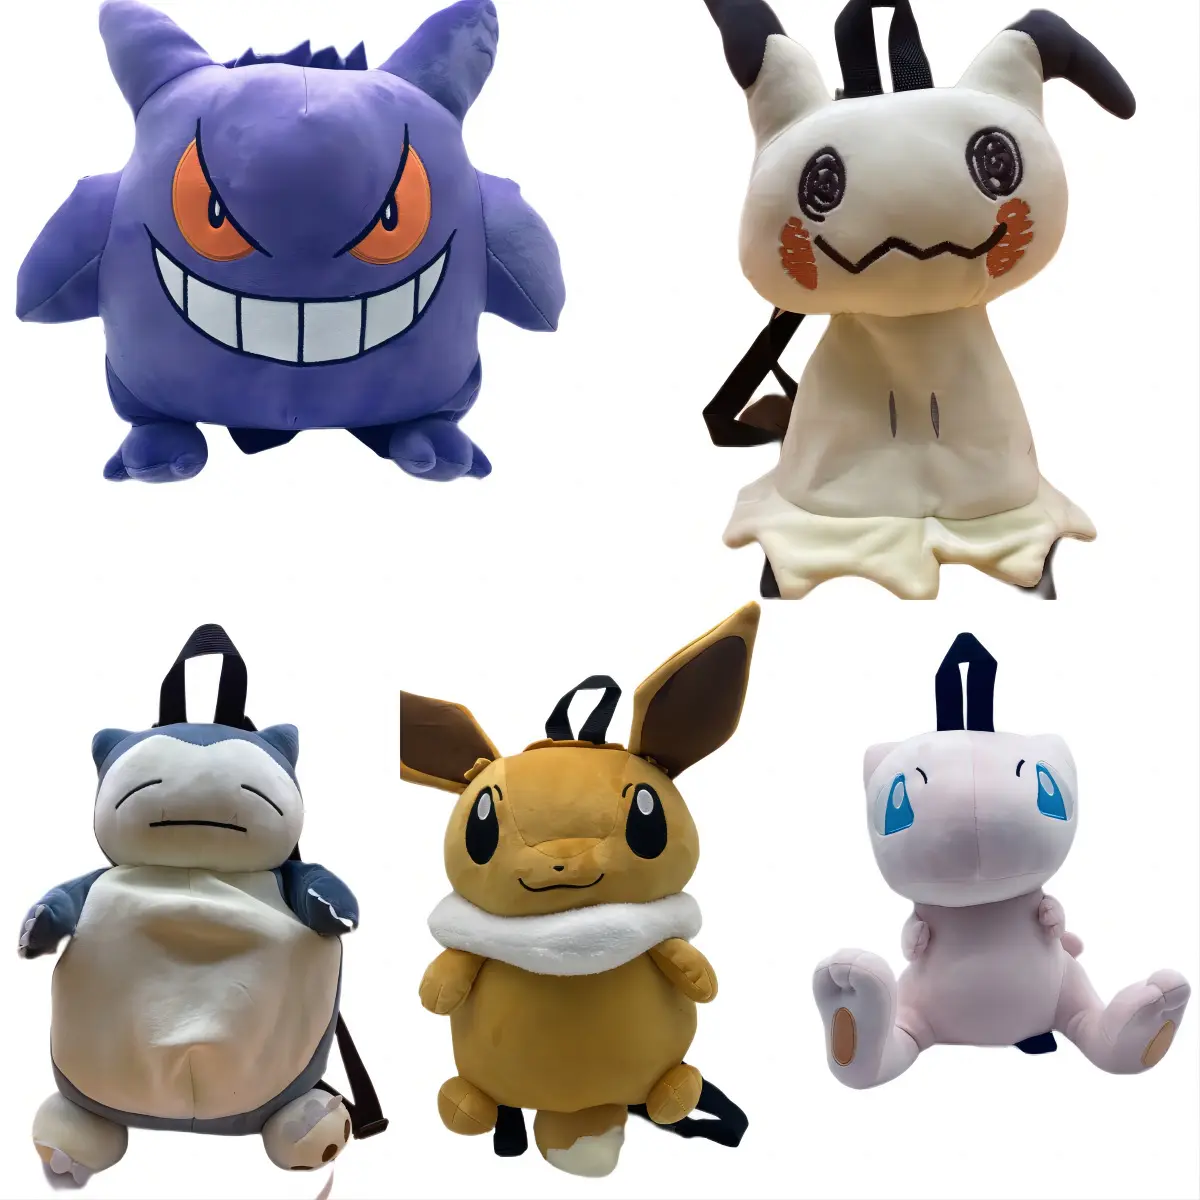 New style anime ditto plush toys pokemoned snorlax mimikyu gengar plush backpack for children gifts